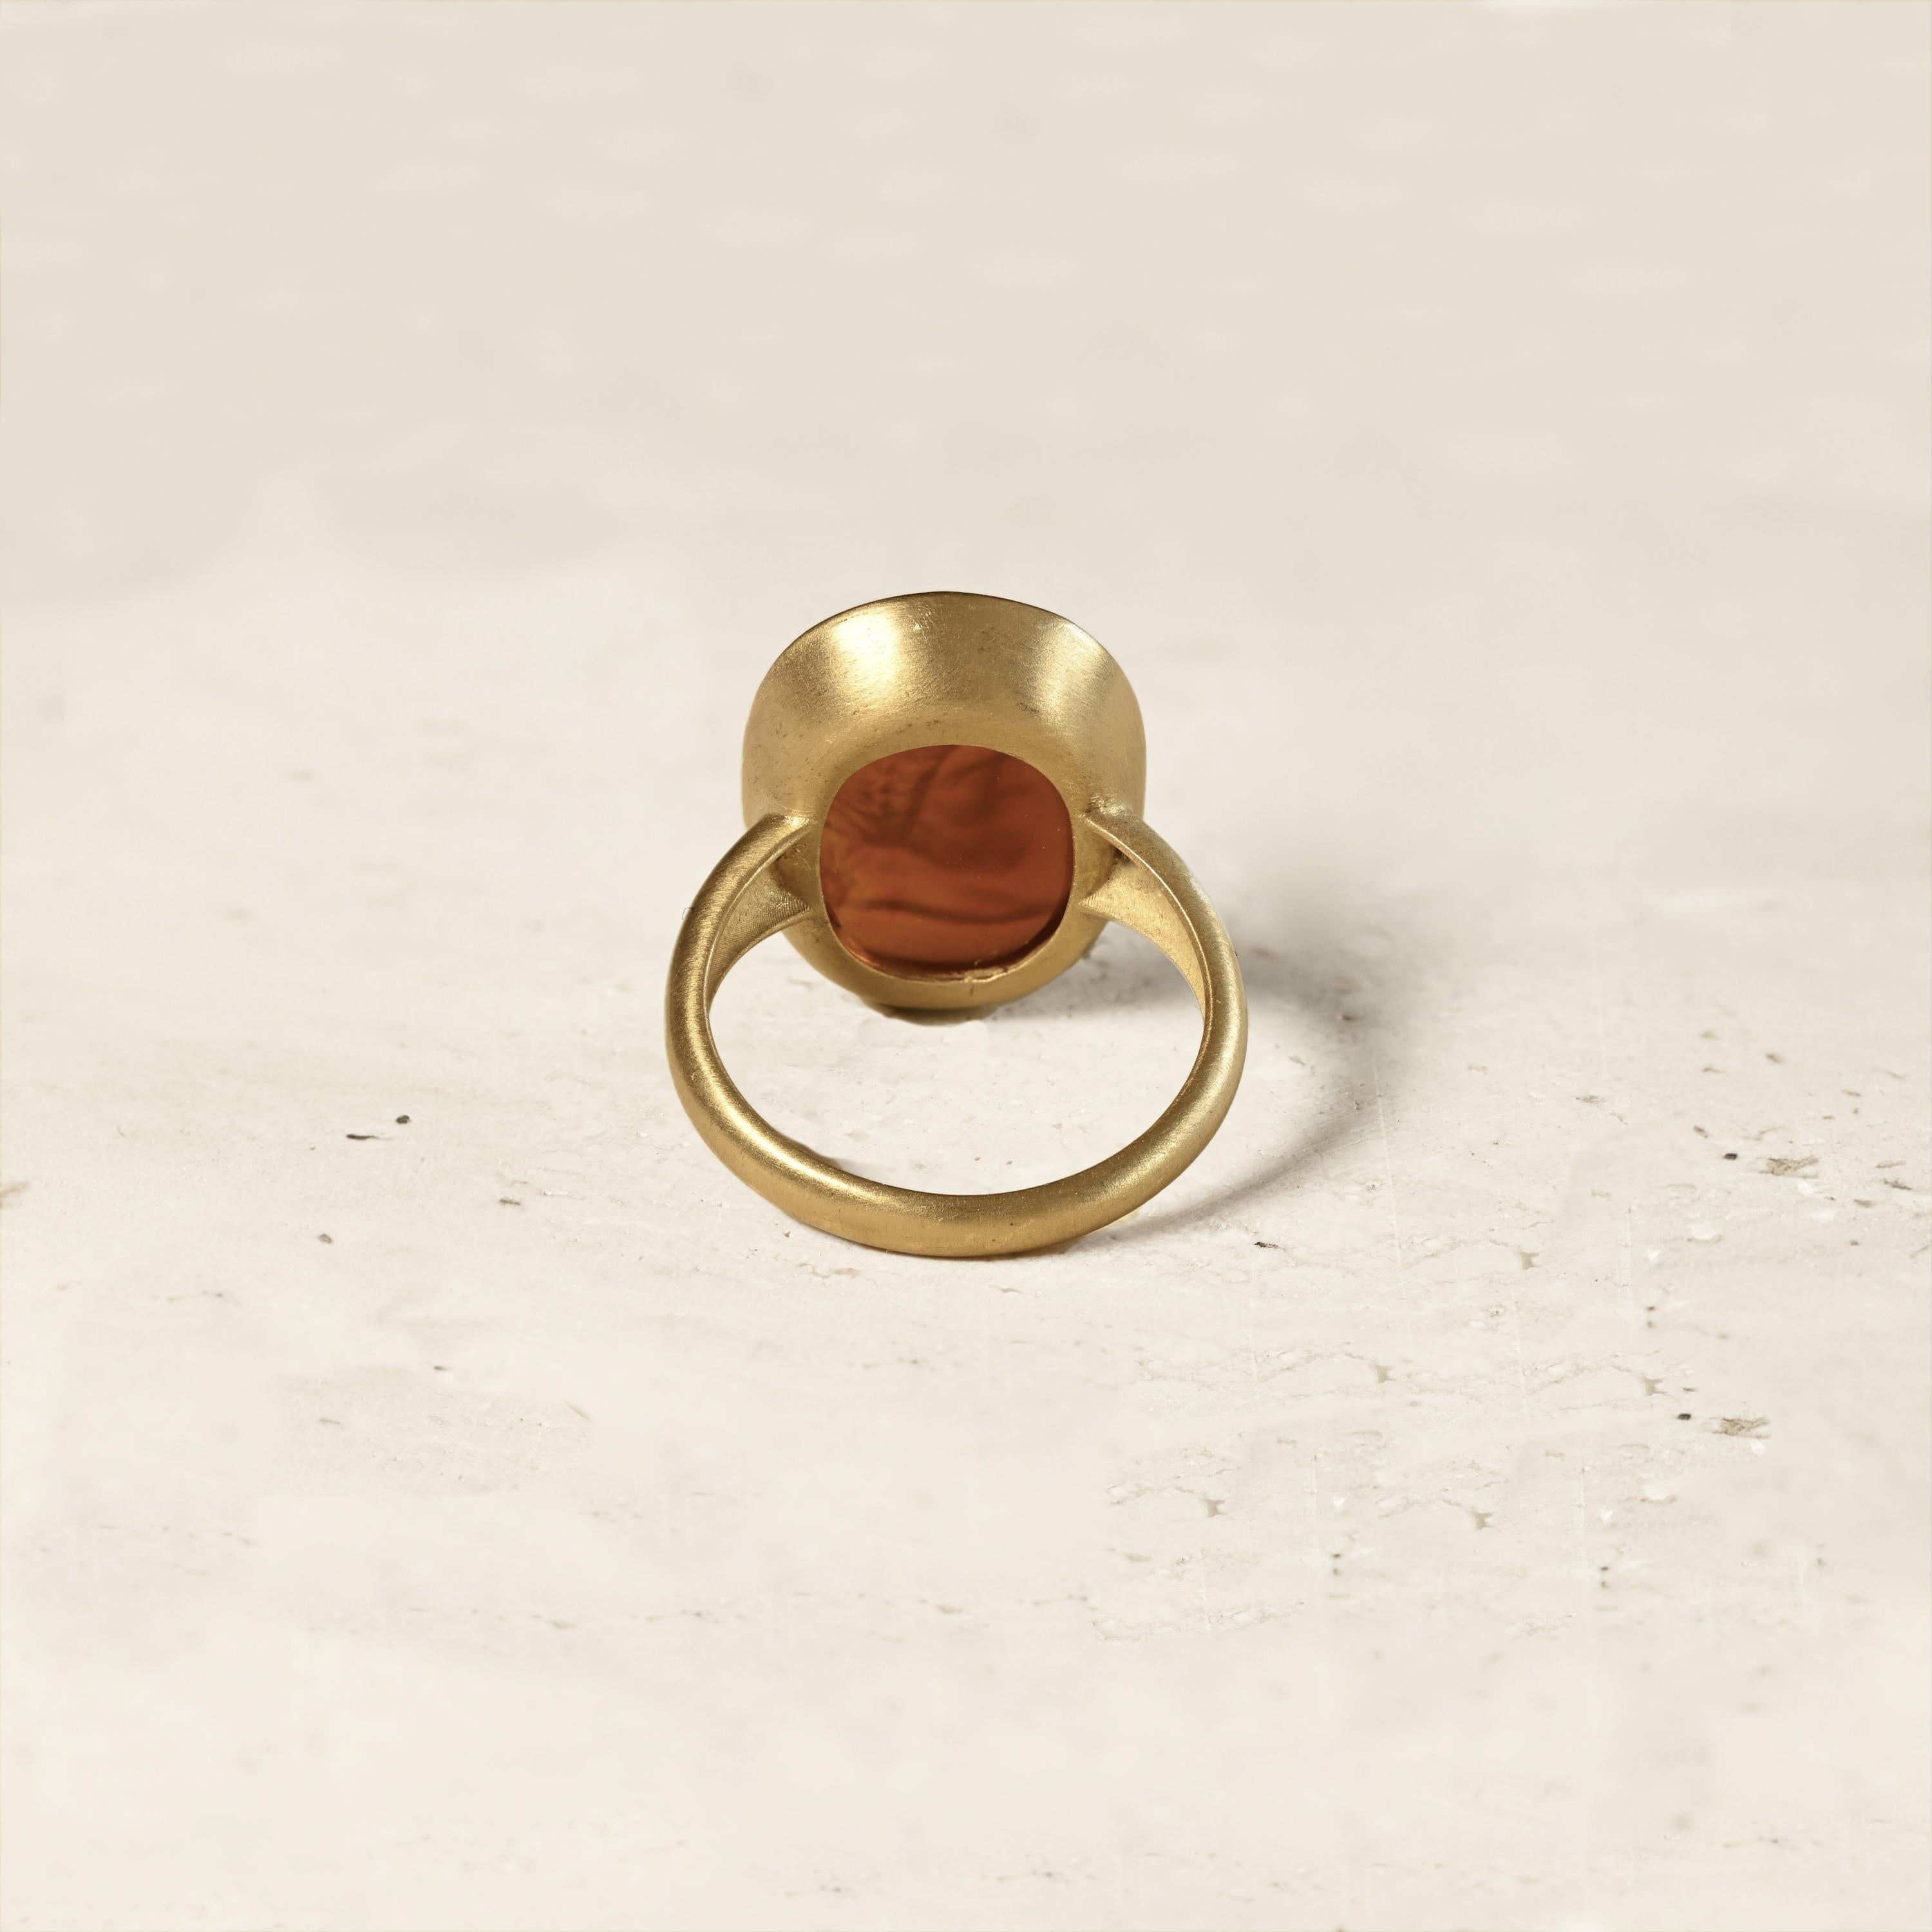 Women's or Men's Authentic Roman Intaglio 1st-2nd century AD 18 kt Gold Ring depicting God Zeus For Sale